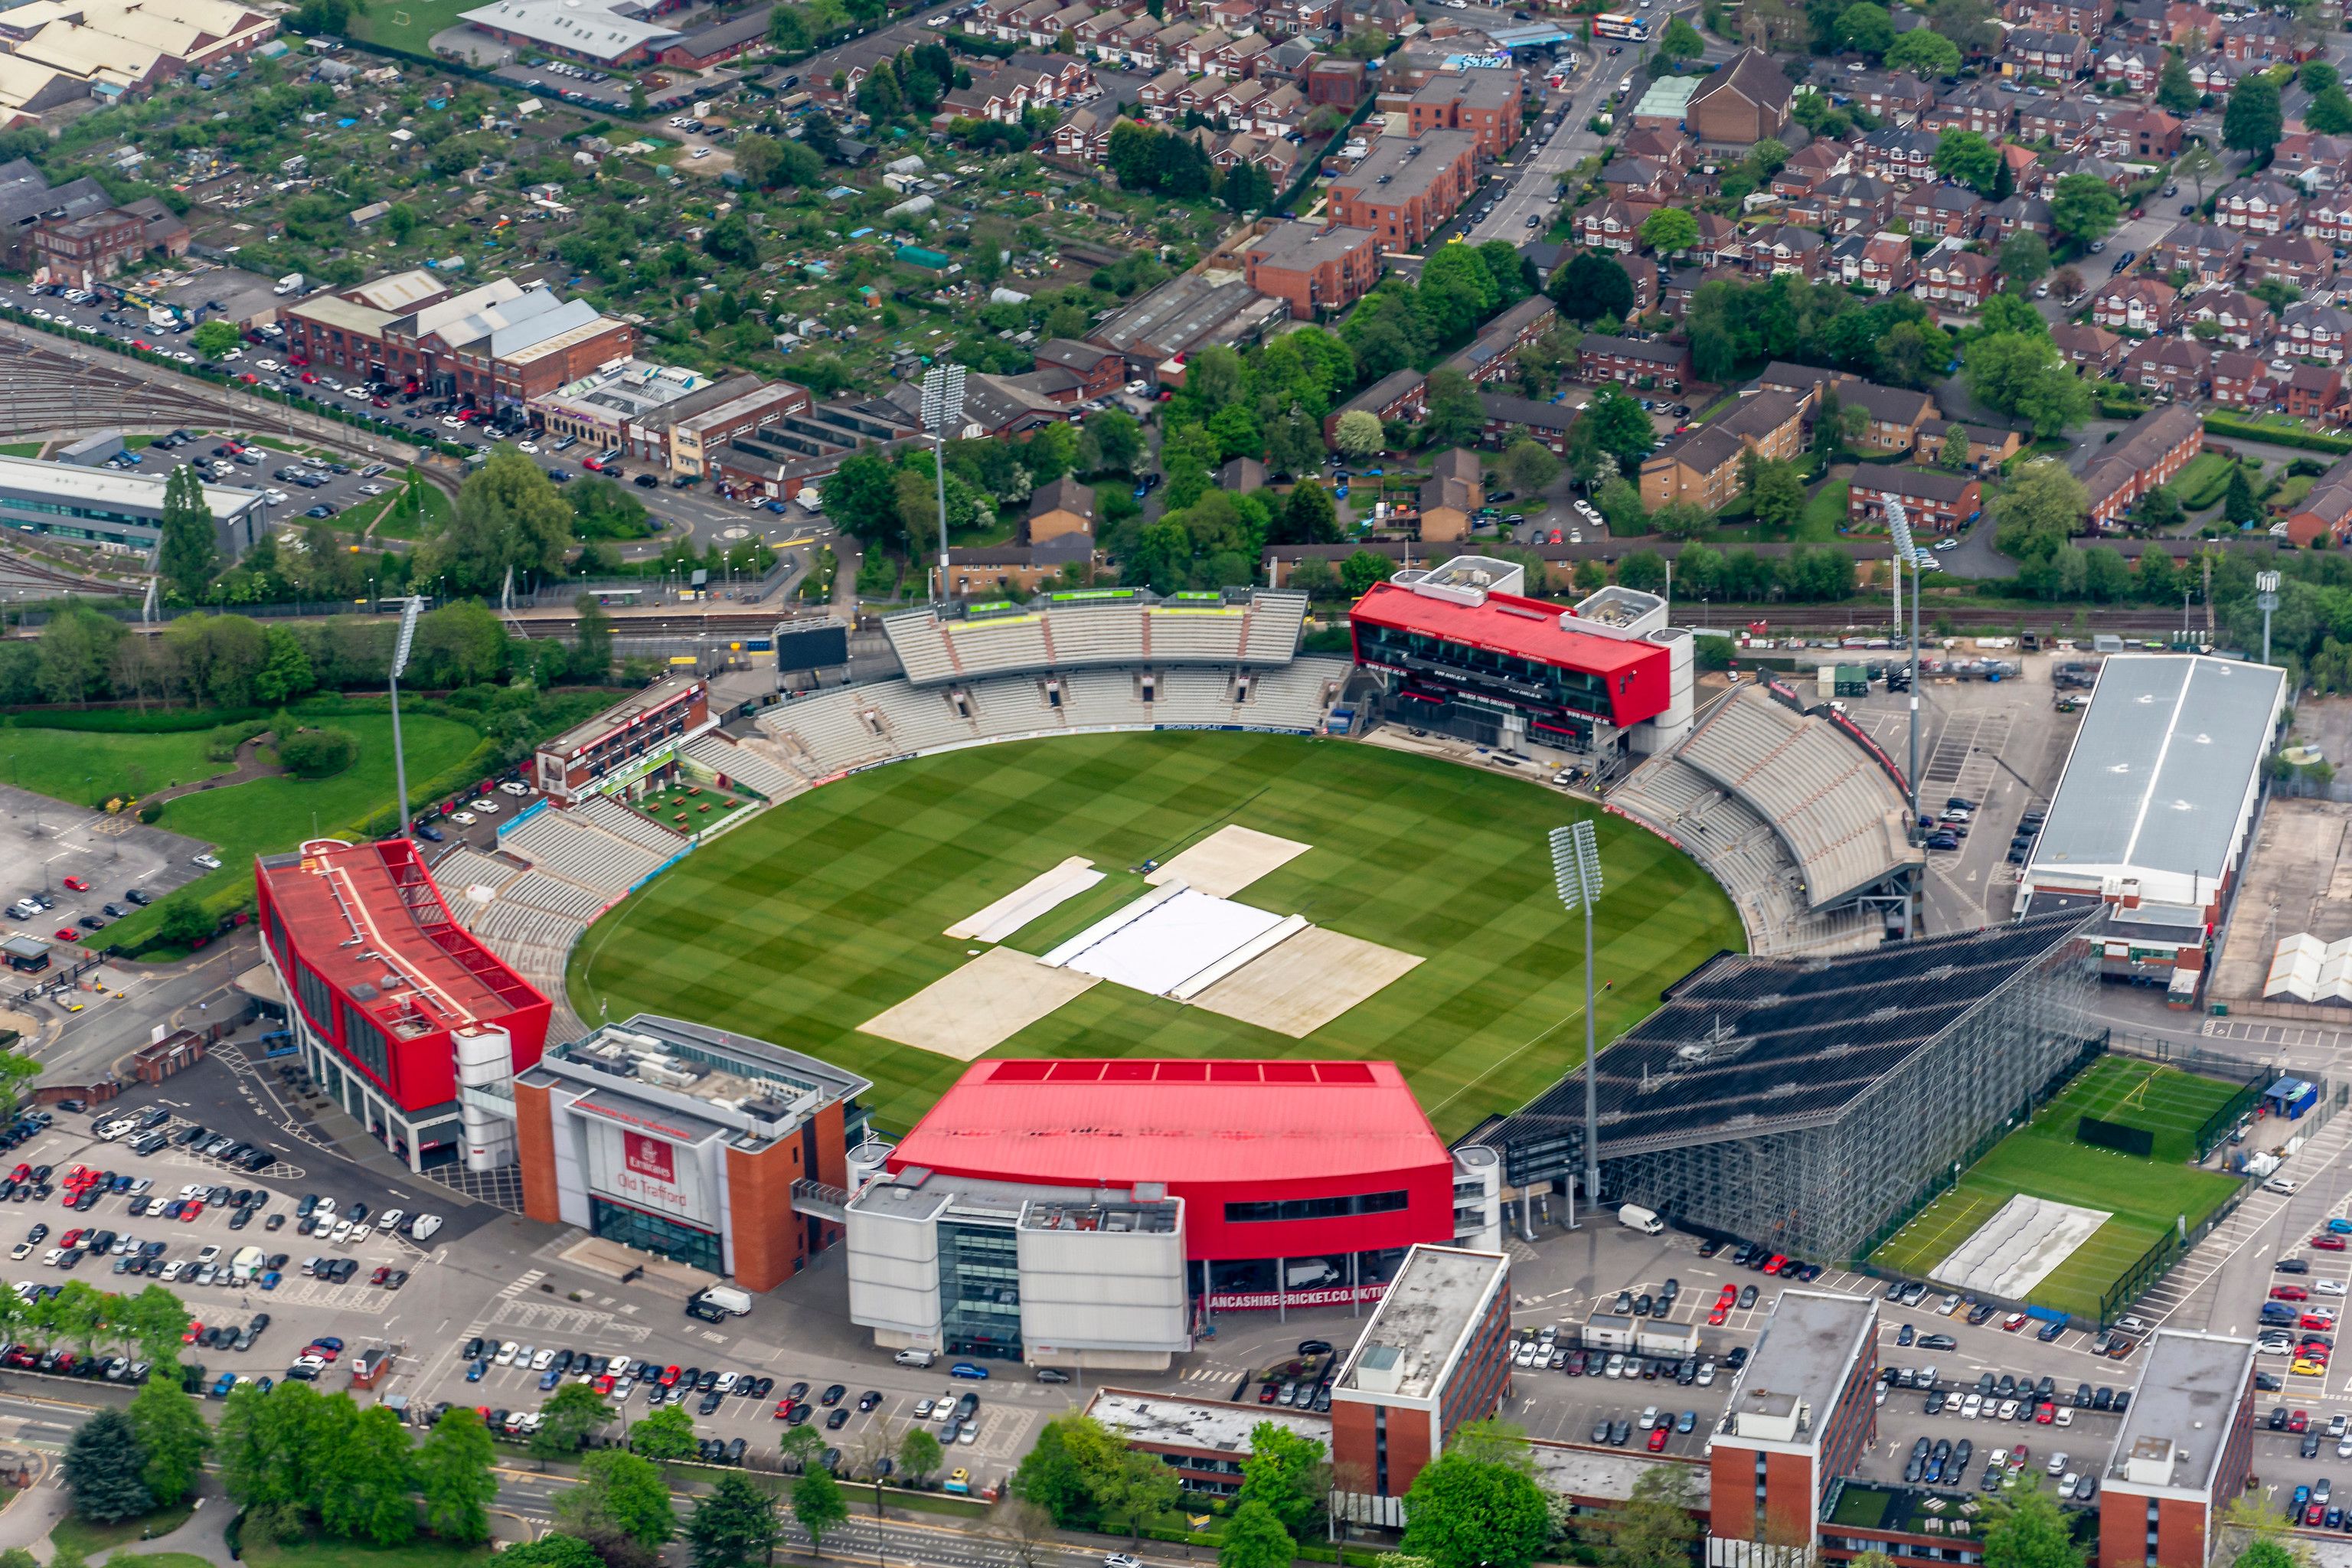 The aerial photo of Old Trafford